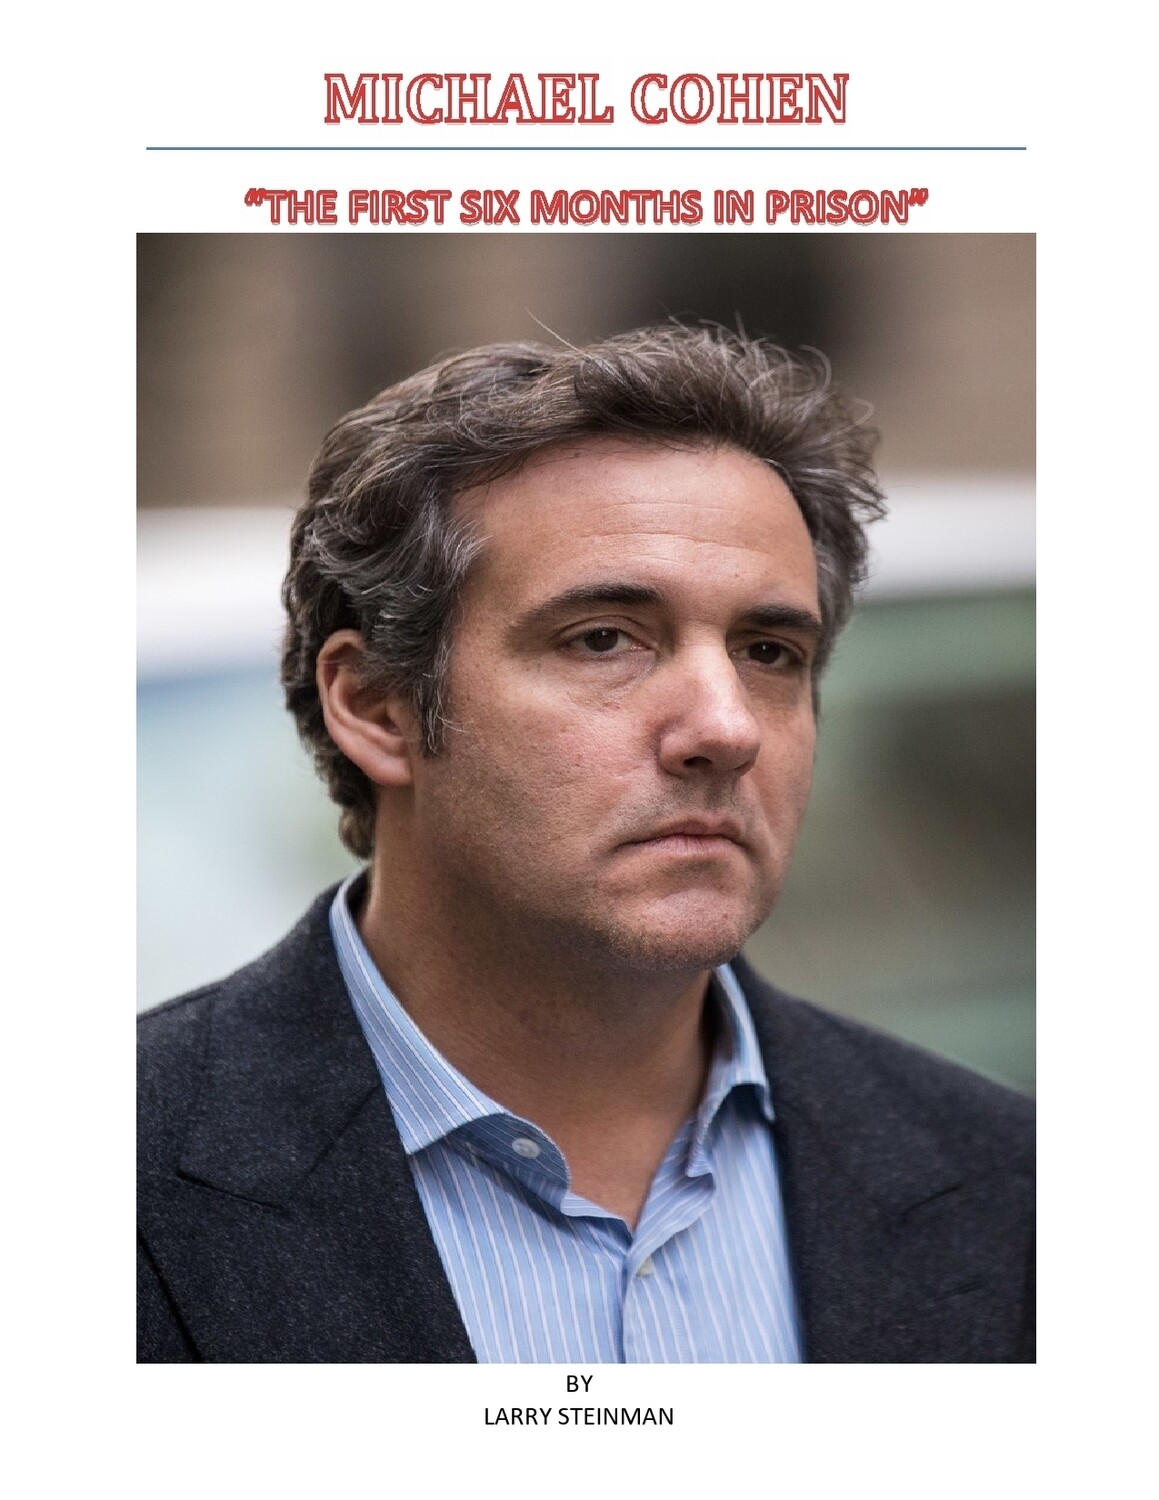 MICHAEL COHEN "THE FIRST SIX MONTHS IN PRISON "    "TAP COVER FOR DESCRIPTION AND SCROLL DOWN "
PREORDER TODAY!!!!!